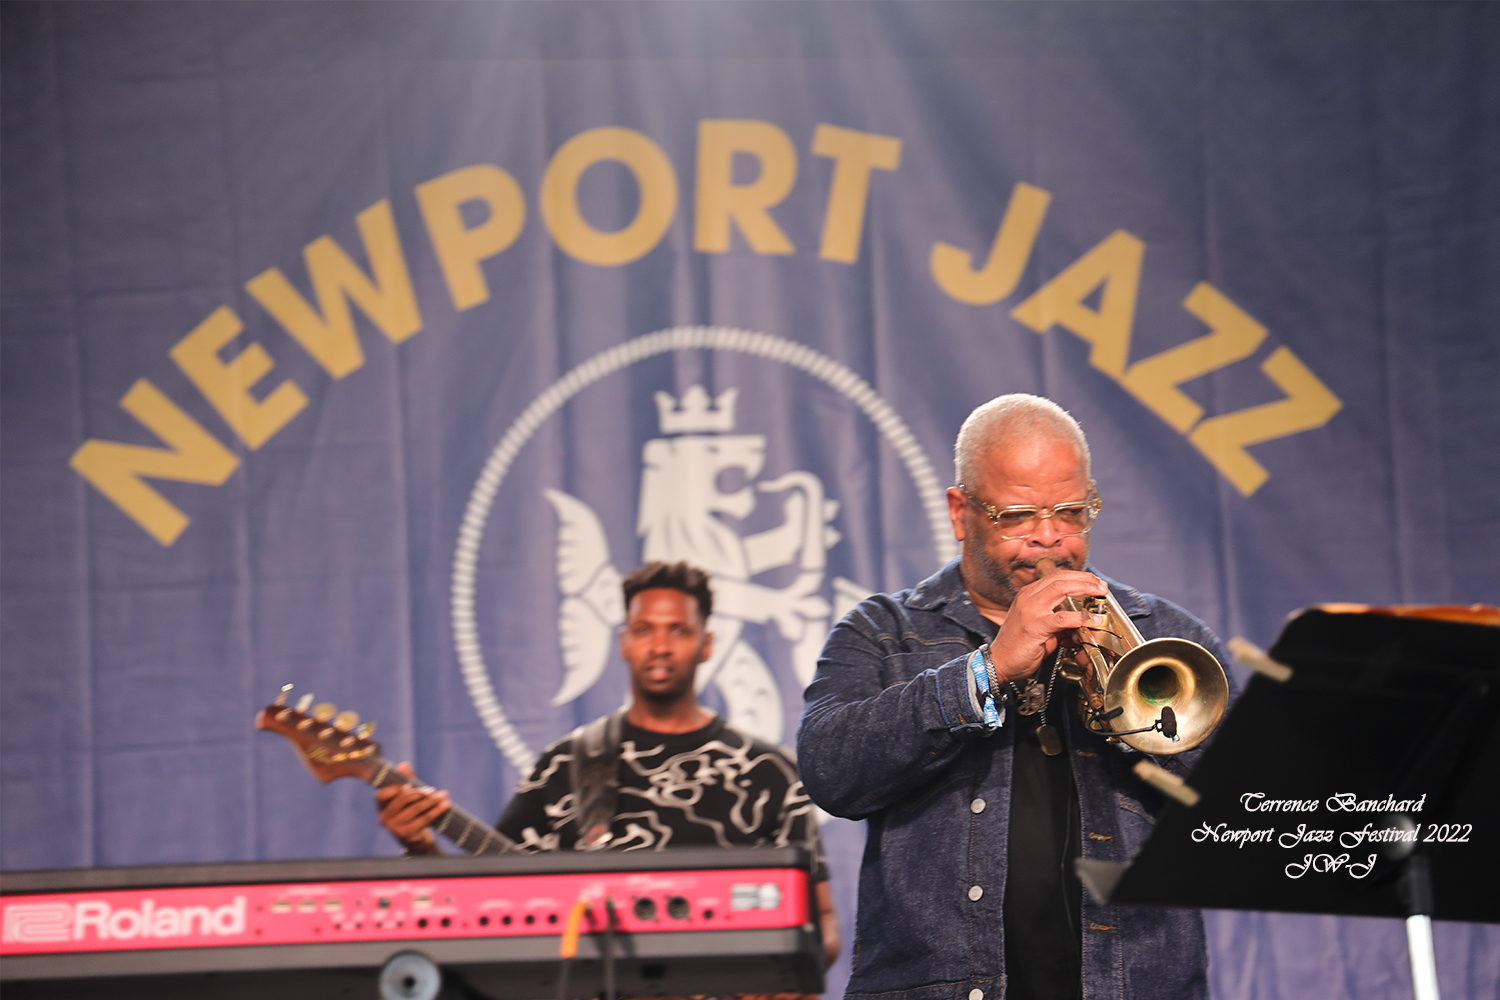 Full color shot of Terrance Blanchard on stage at the 2022 Newport Jazz Festival in Rhode Island